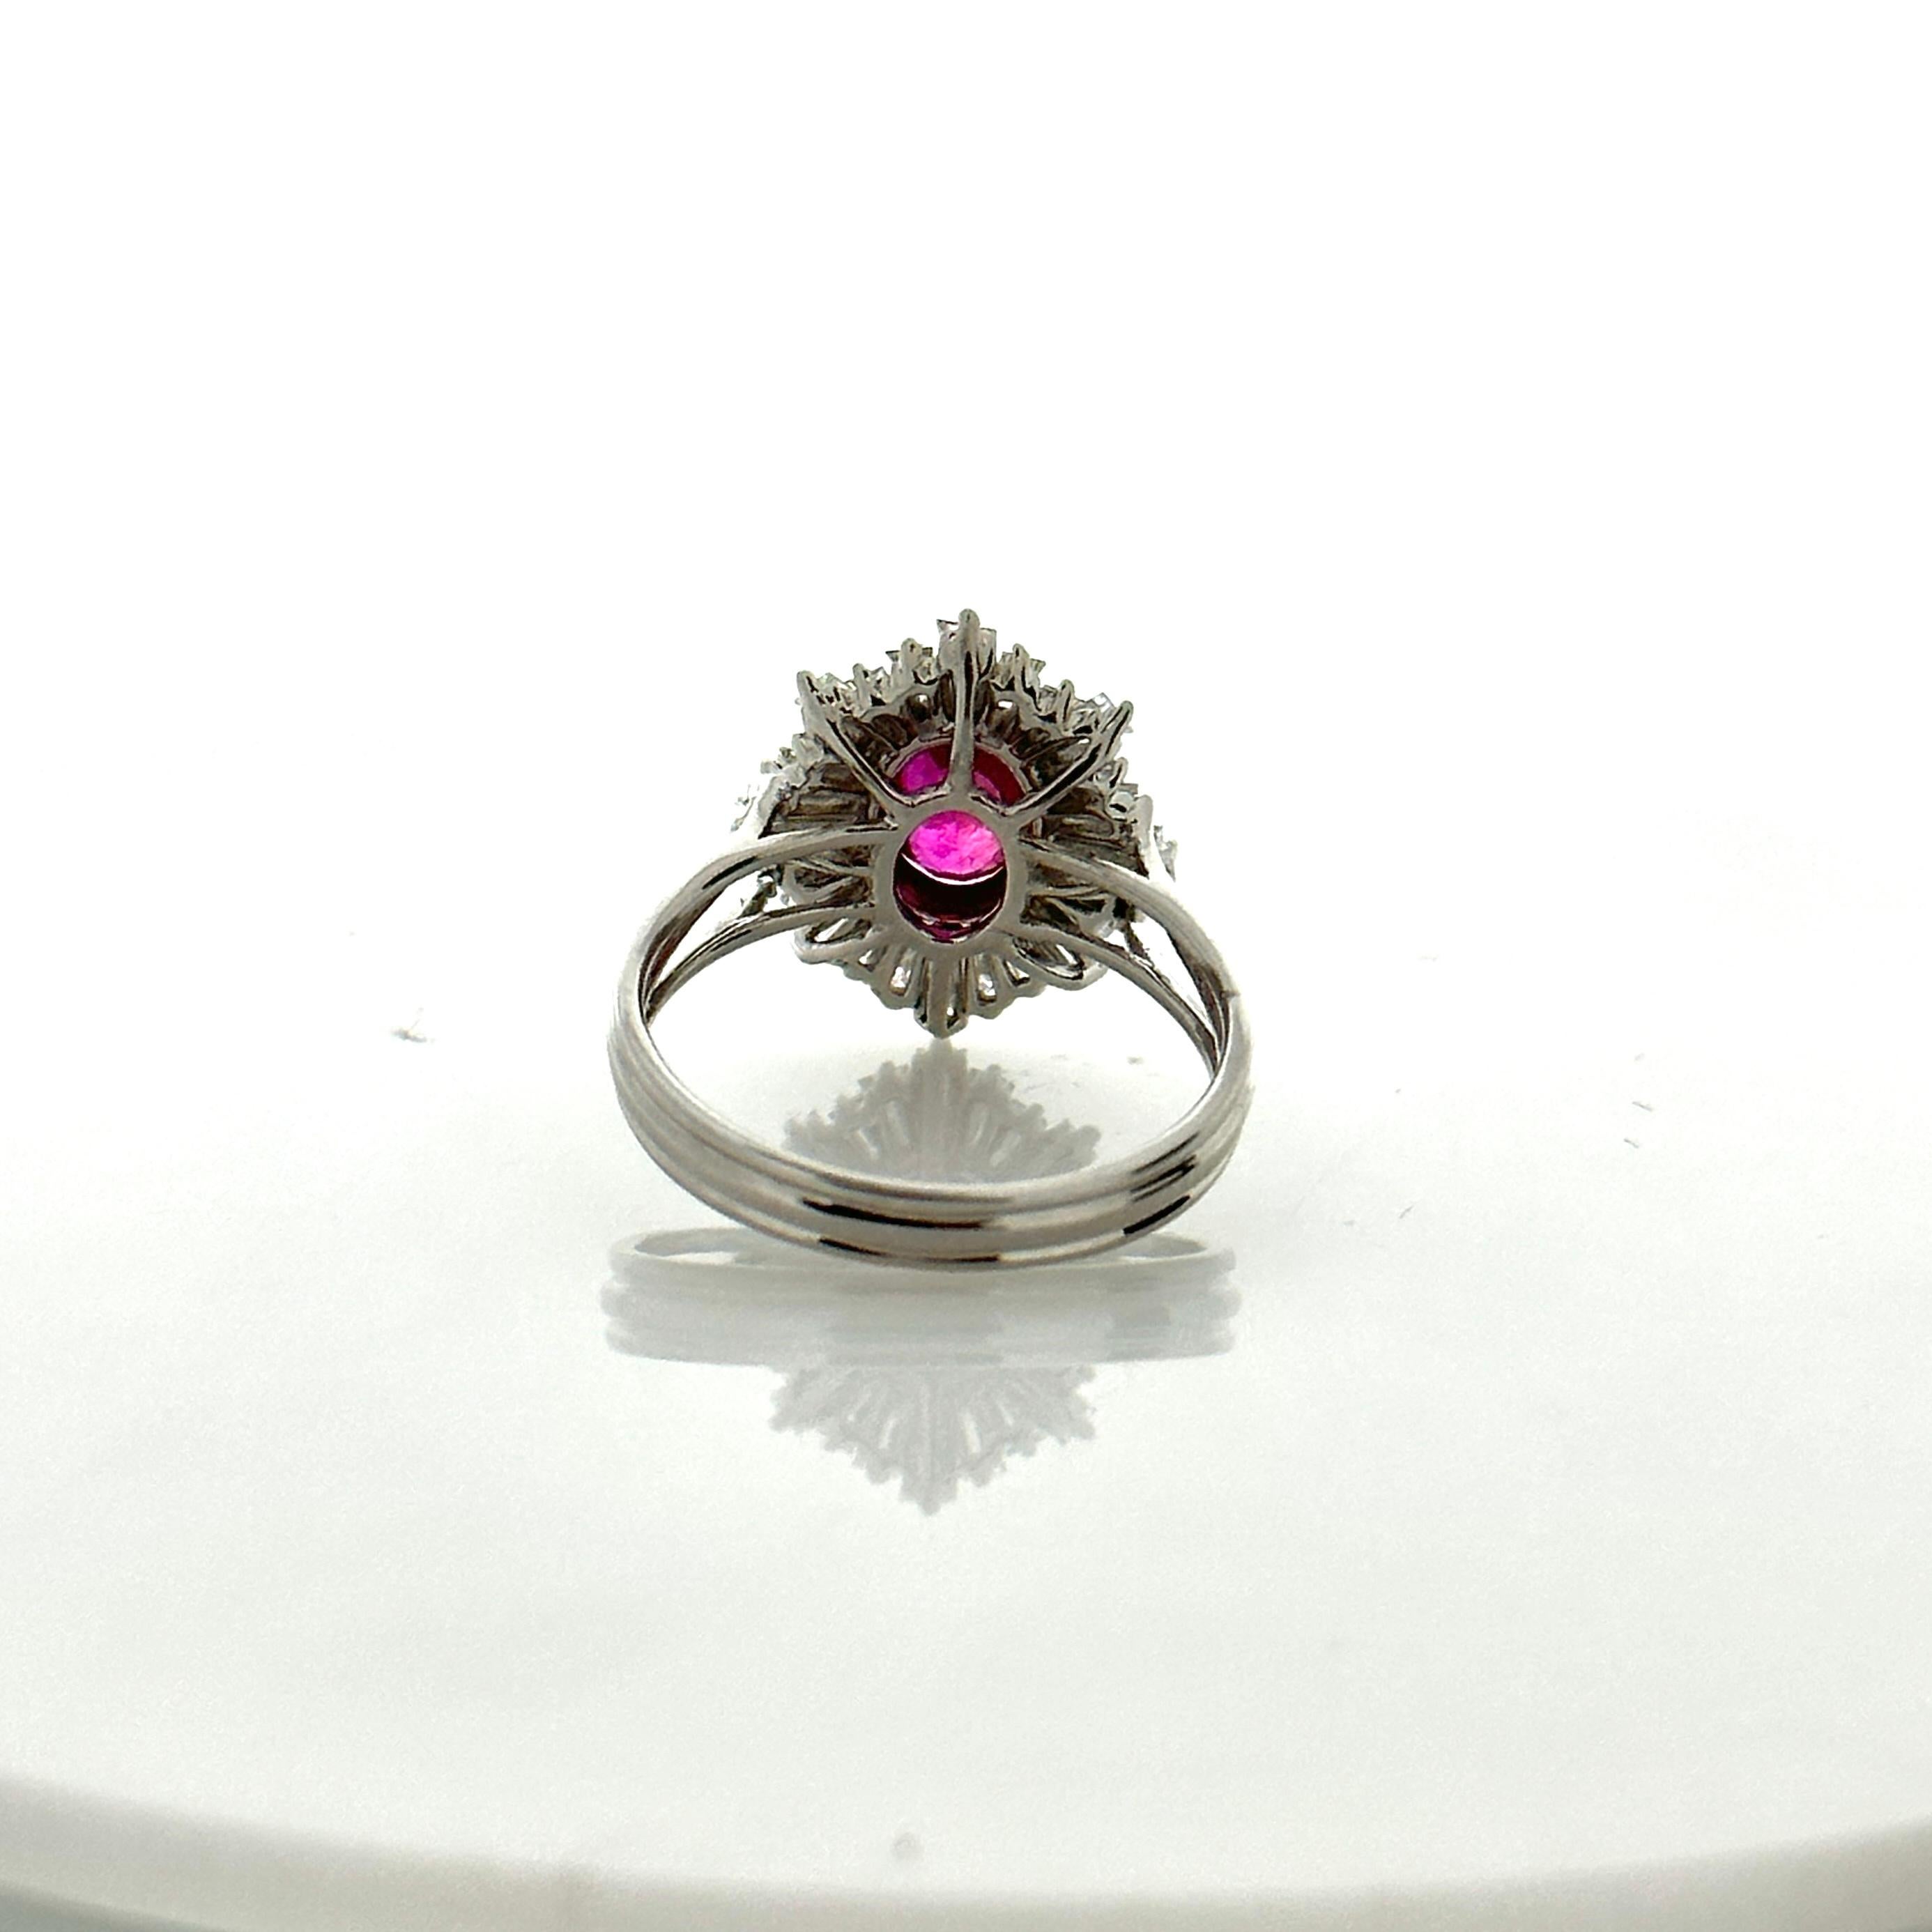 Cushion Cut 1.26 Carat Oval Ruby and Diamond Ring in 18K White Gold For Sale